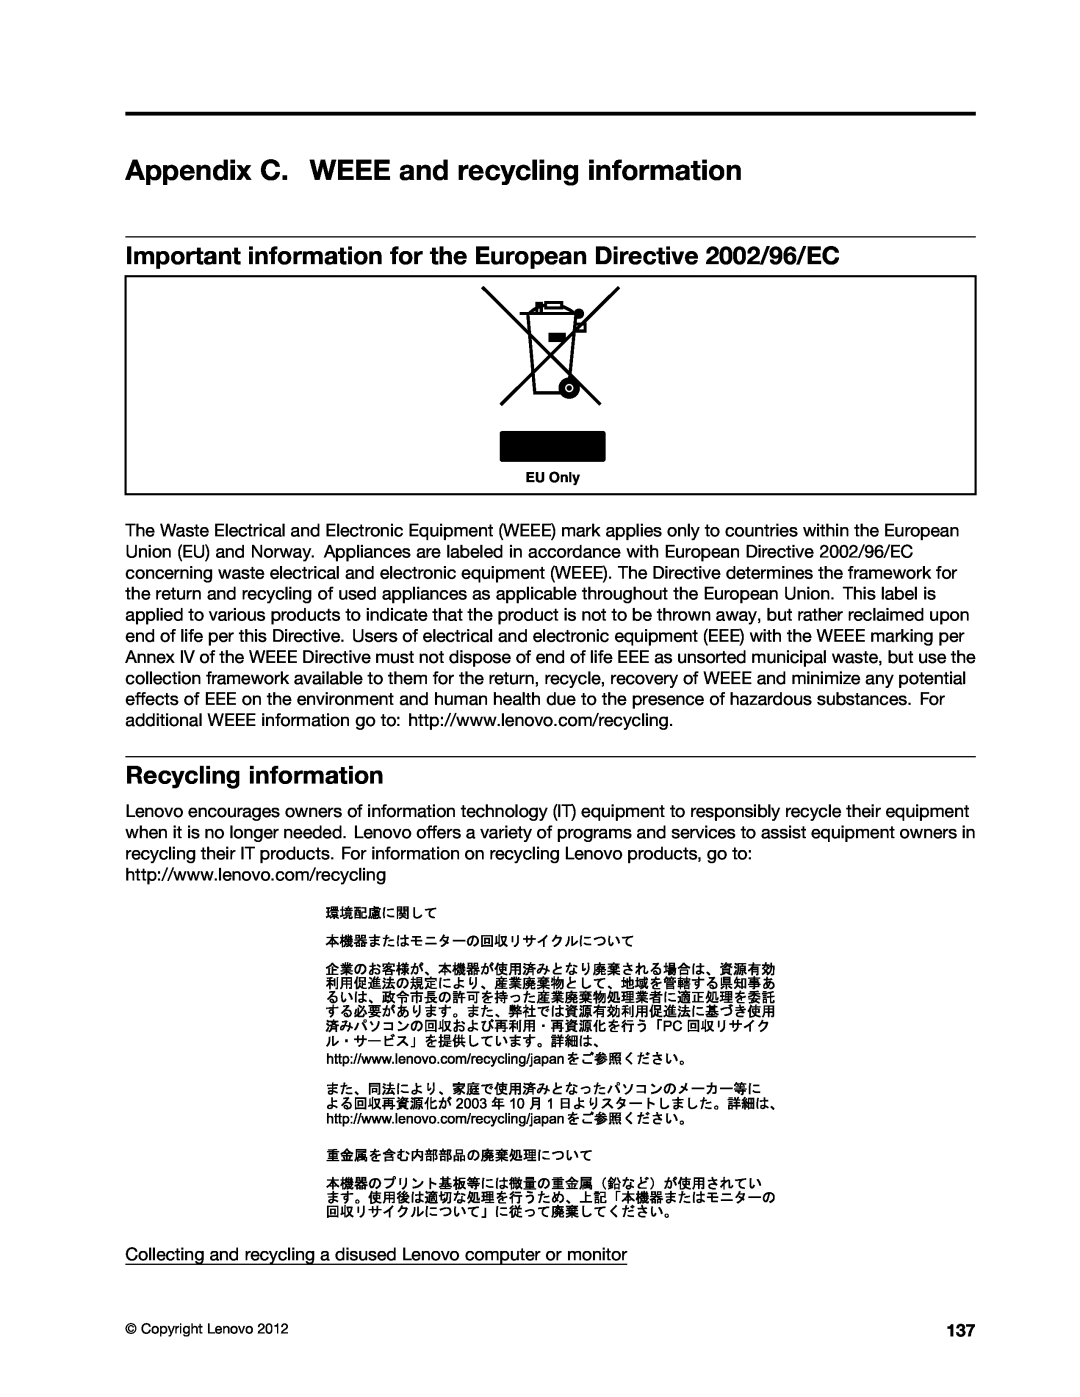 Lenovo 2697 manual Appendix C. WEEE and recycling information, Important information for the European Directive 2002/96/EC 